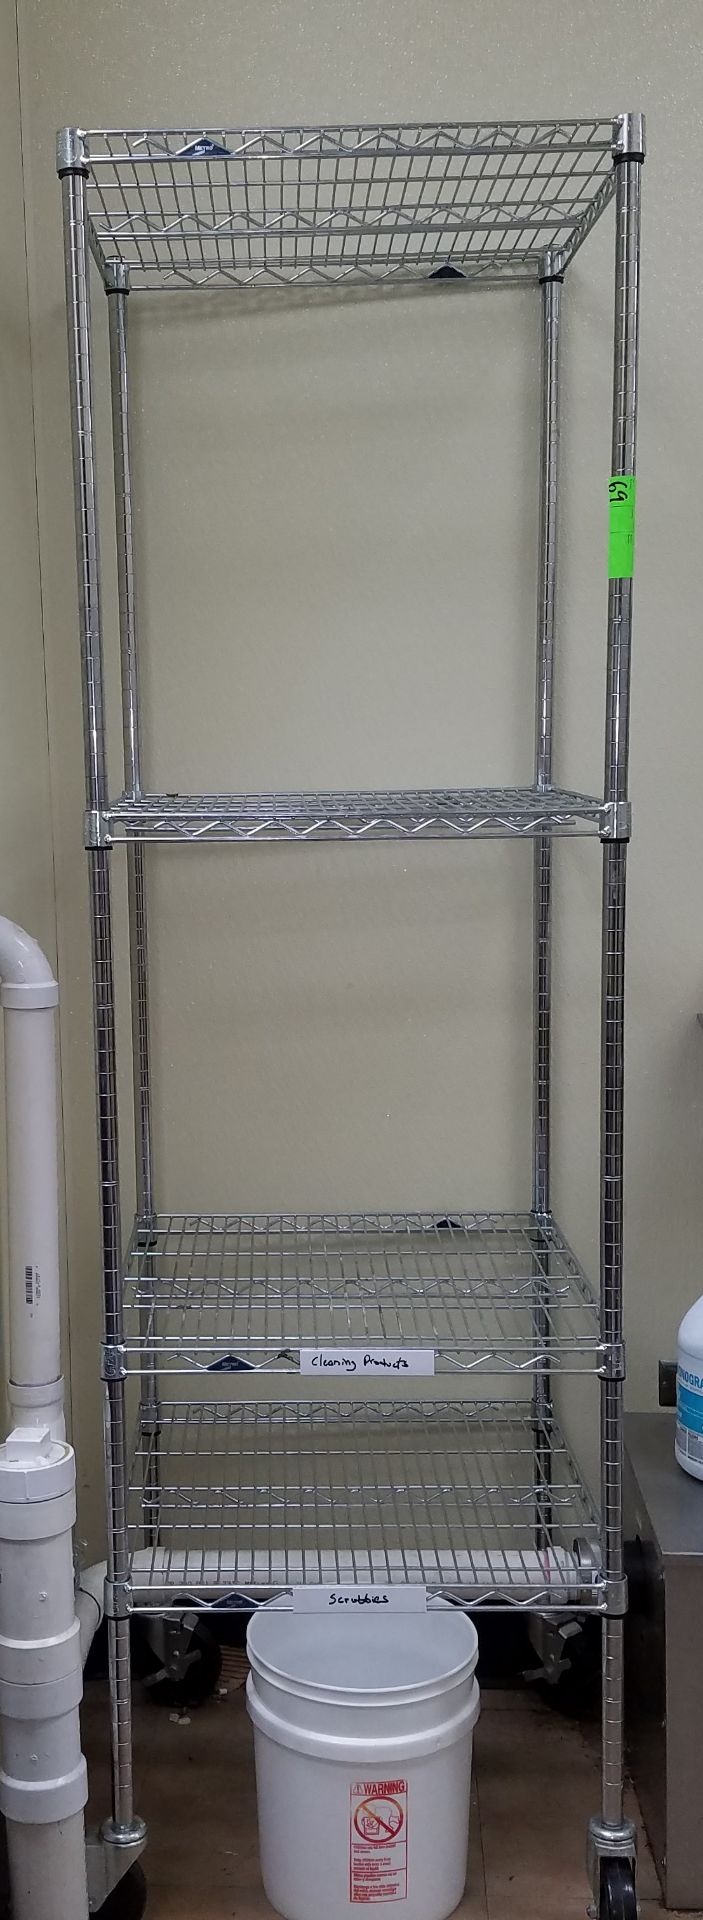 Metro stainless steel rack with casters 24" x 24"